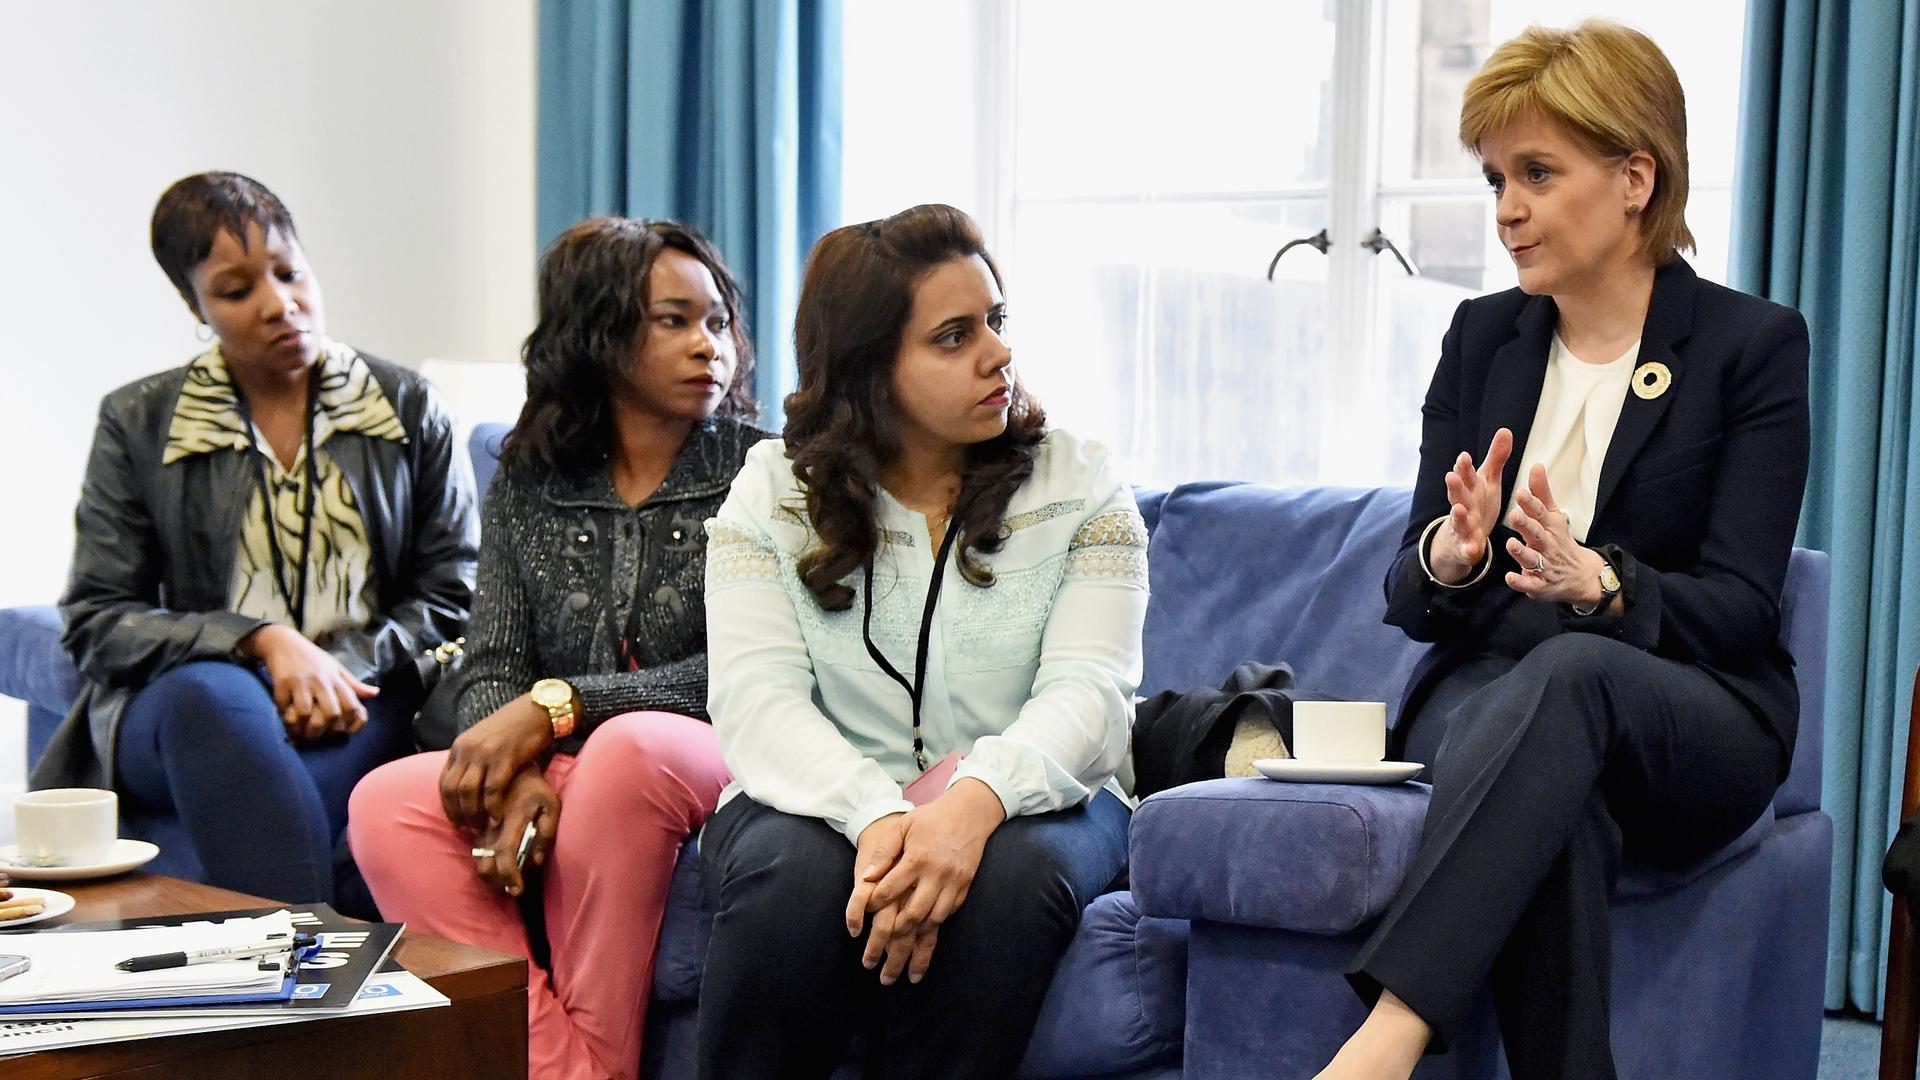 Nicola Sturgeon, Scotland's First Minister, meets with a representative from a refugee community.